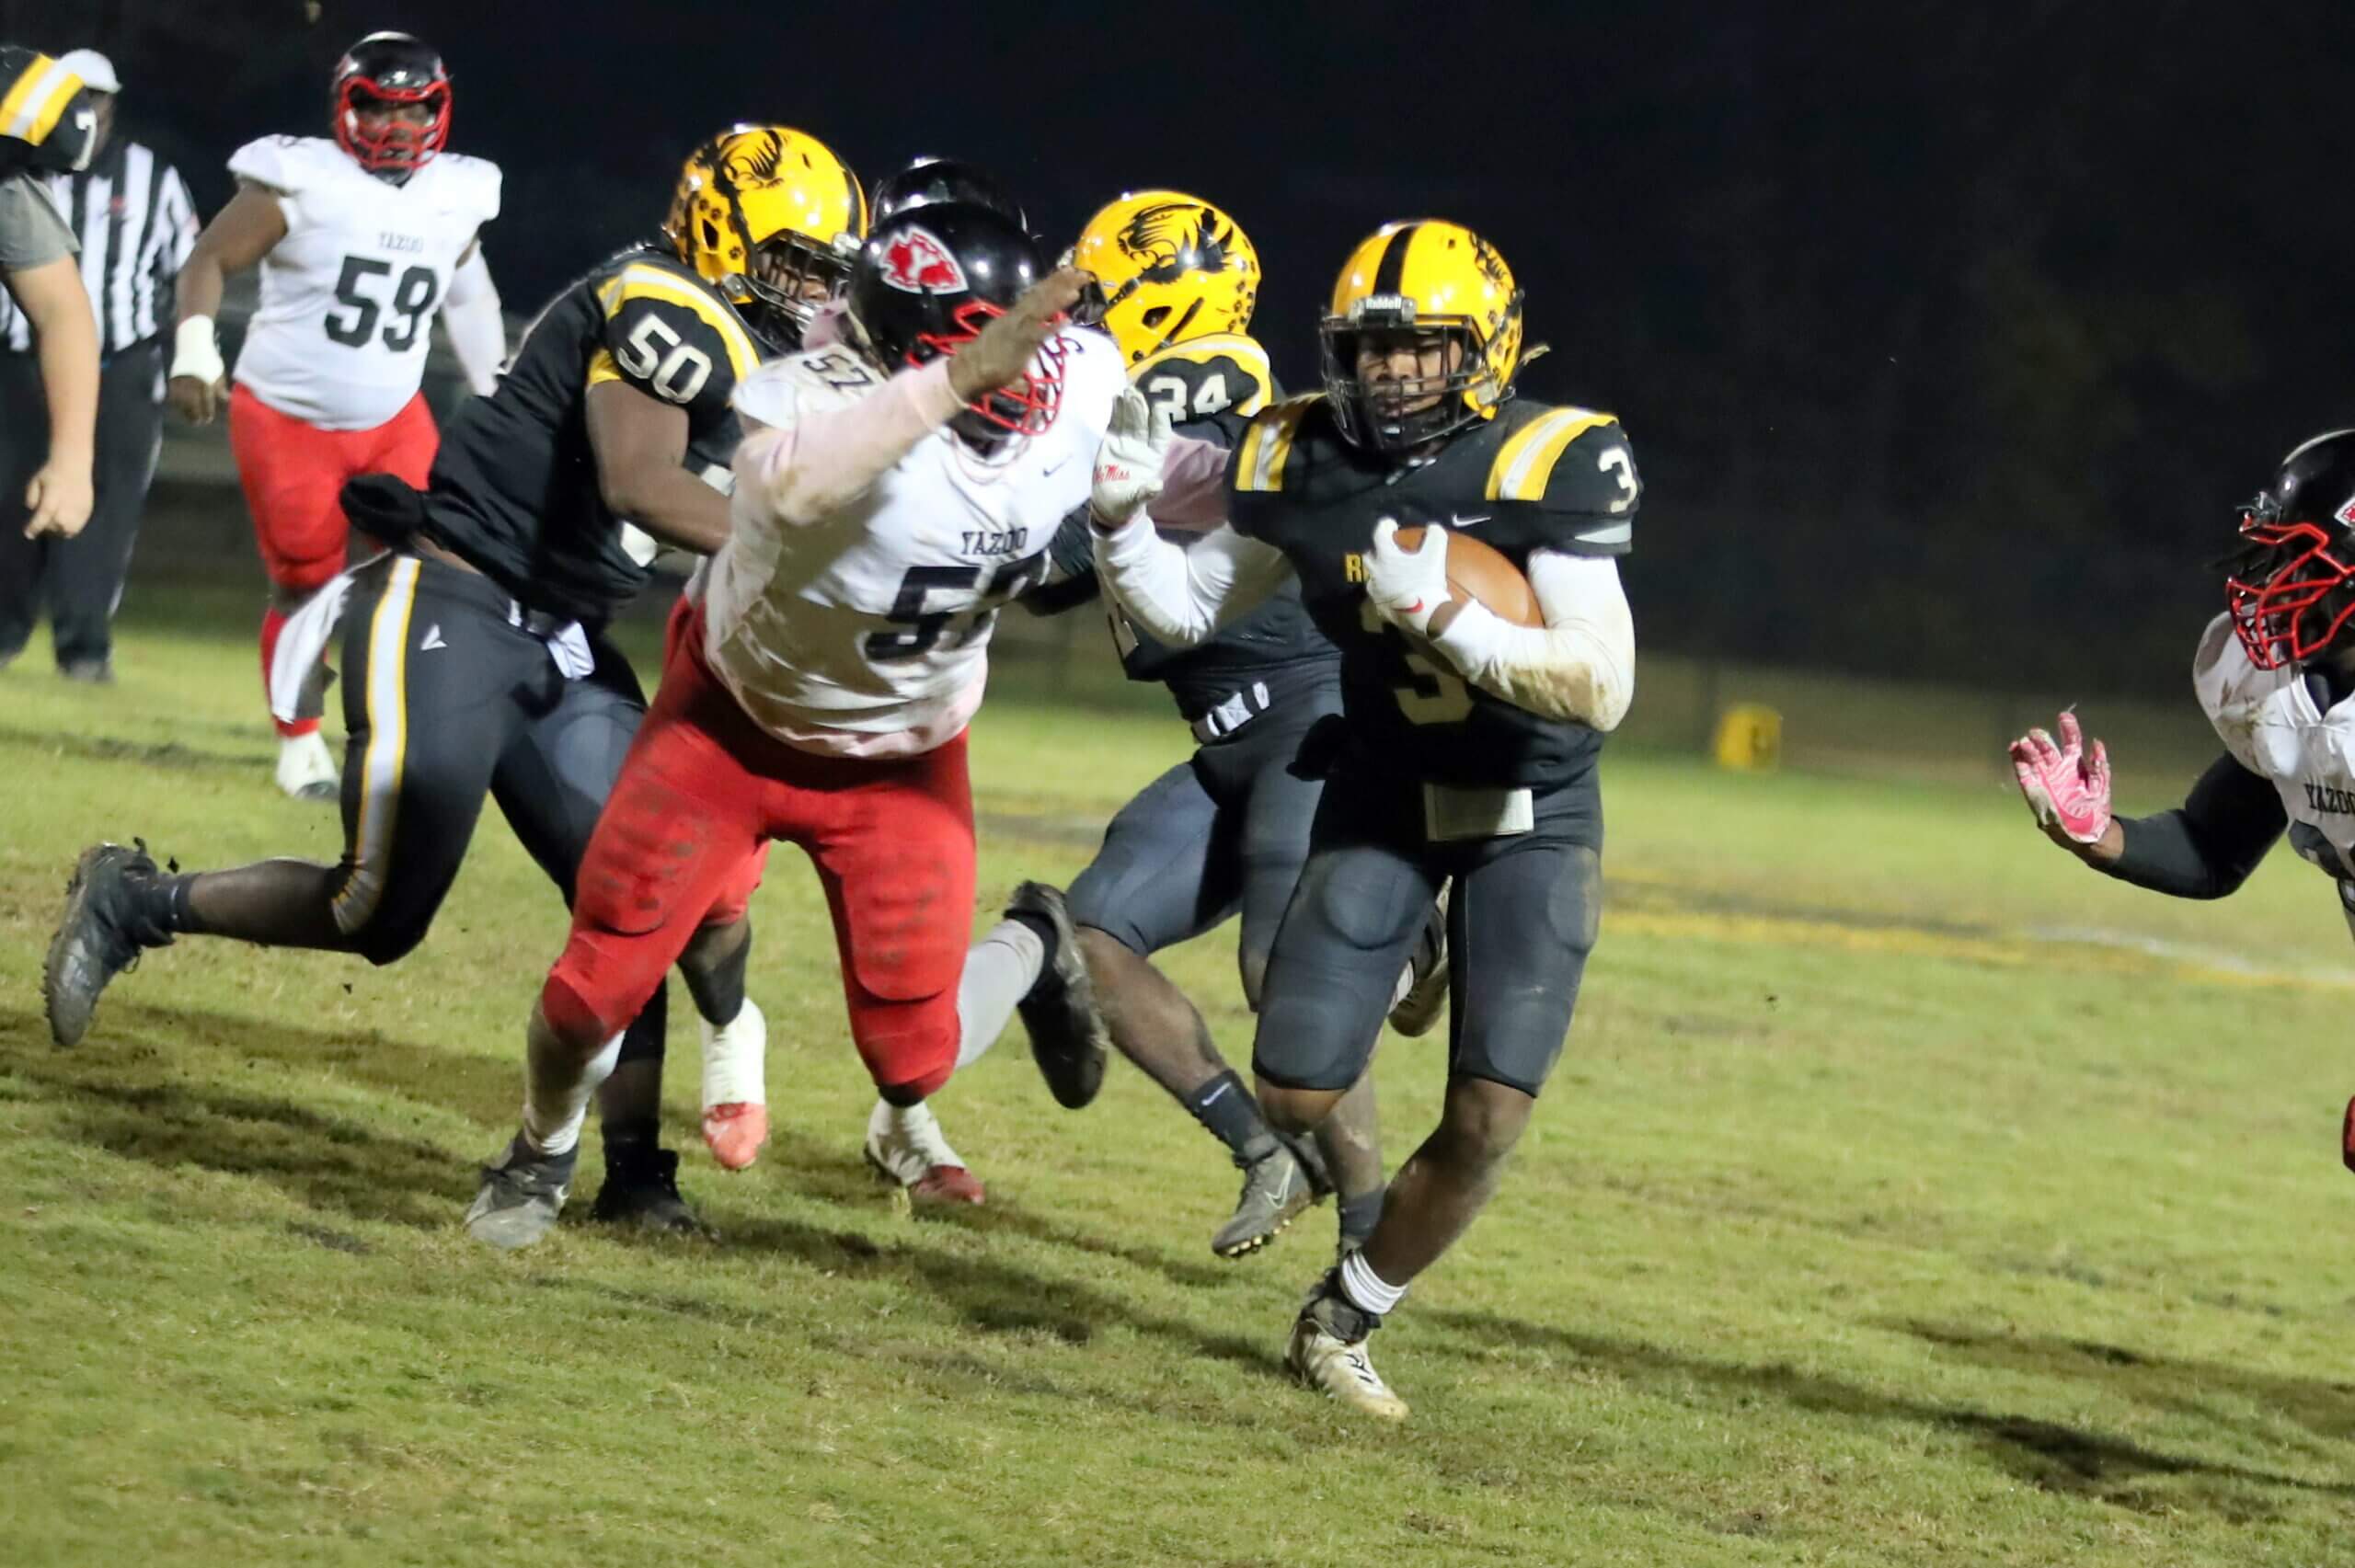 Tigers ground Yazoo City's air attack to advance to second round of playoffs